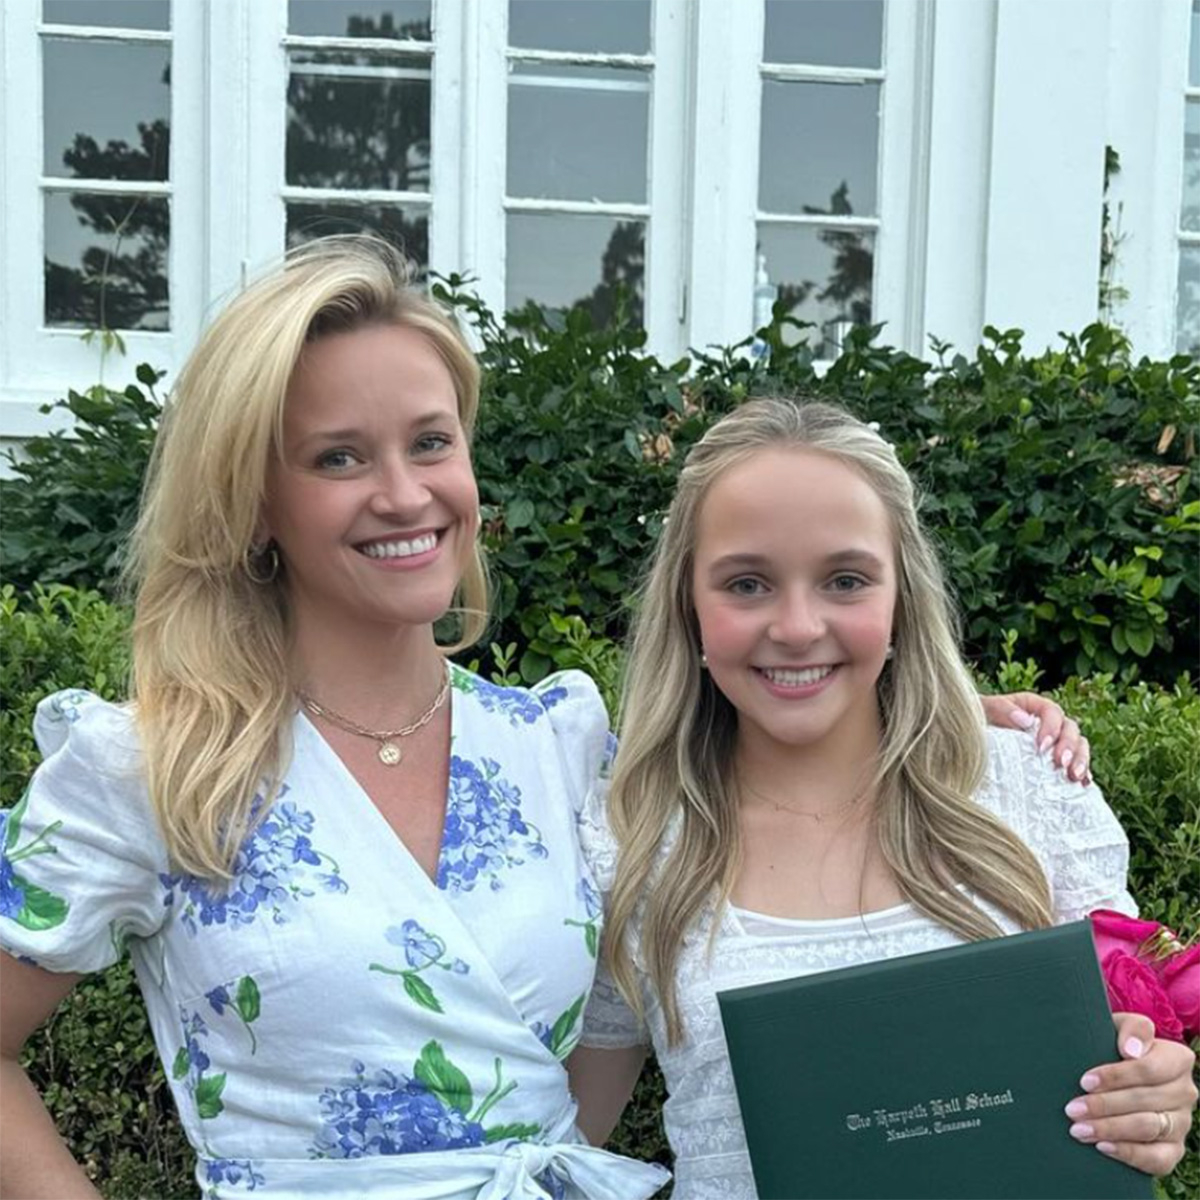 Reese Witherspoon Has “Tears of Joy” at Niece’s High School Graduation